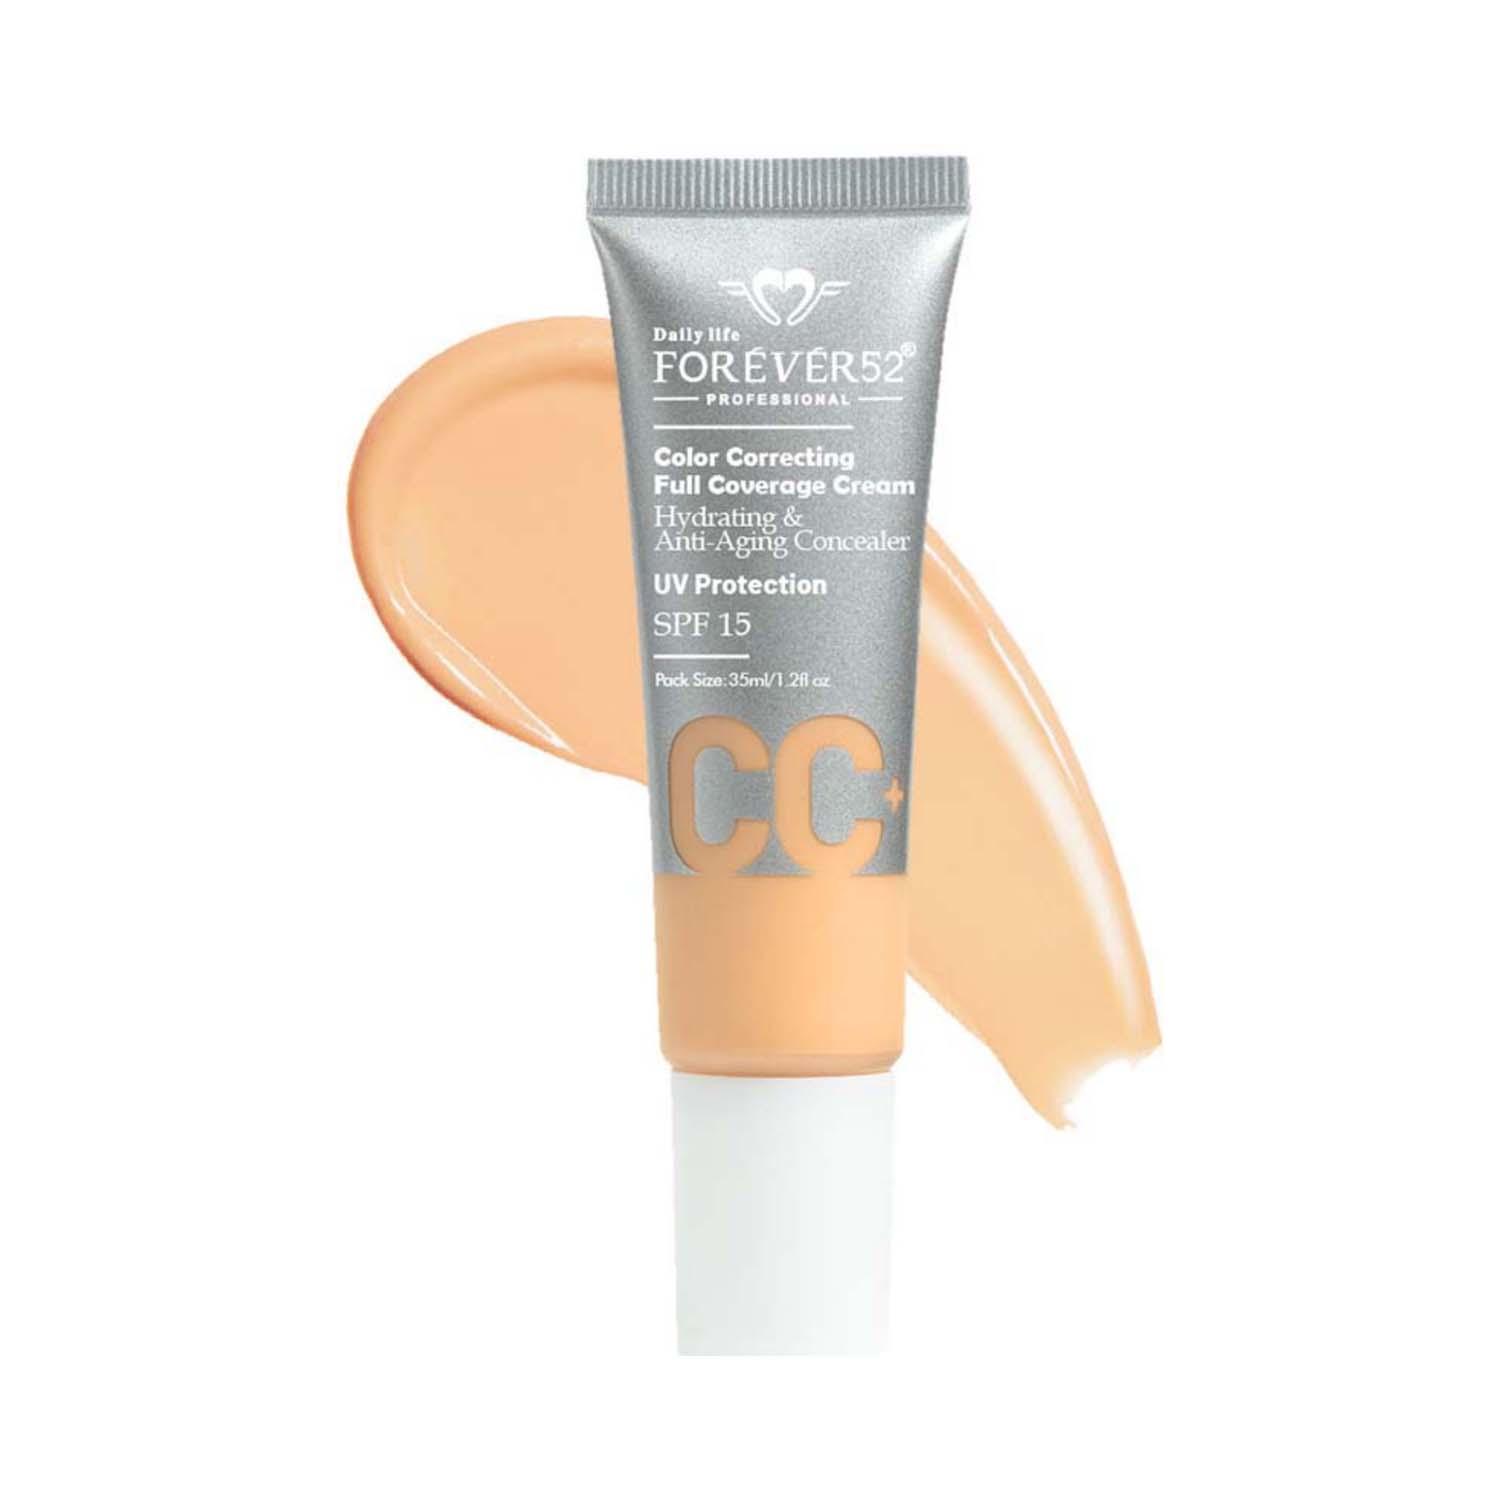 Daily Life Forever52 | Daily Life Forever52 Color Correcting CC Cream With SPF 15 - 004 Greige (35 ml)